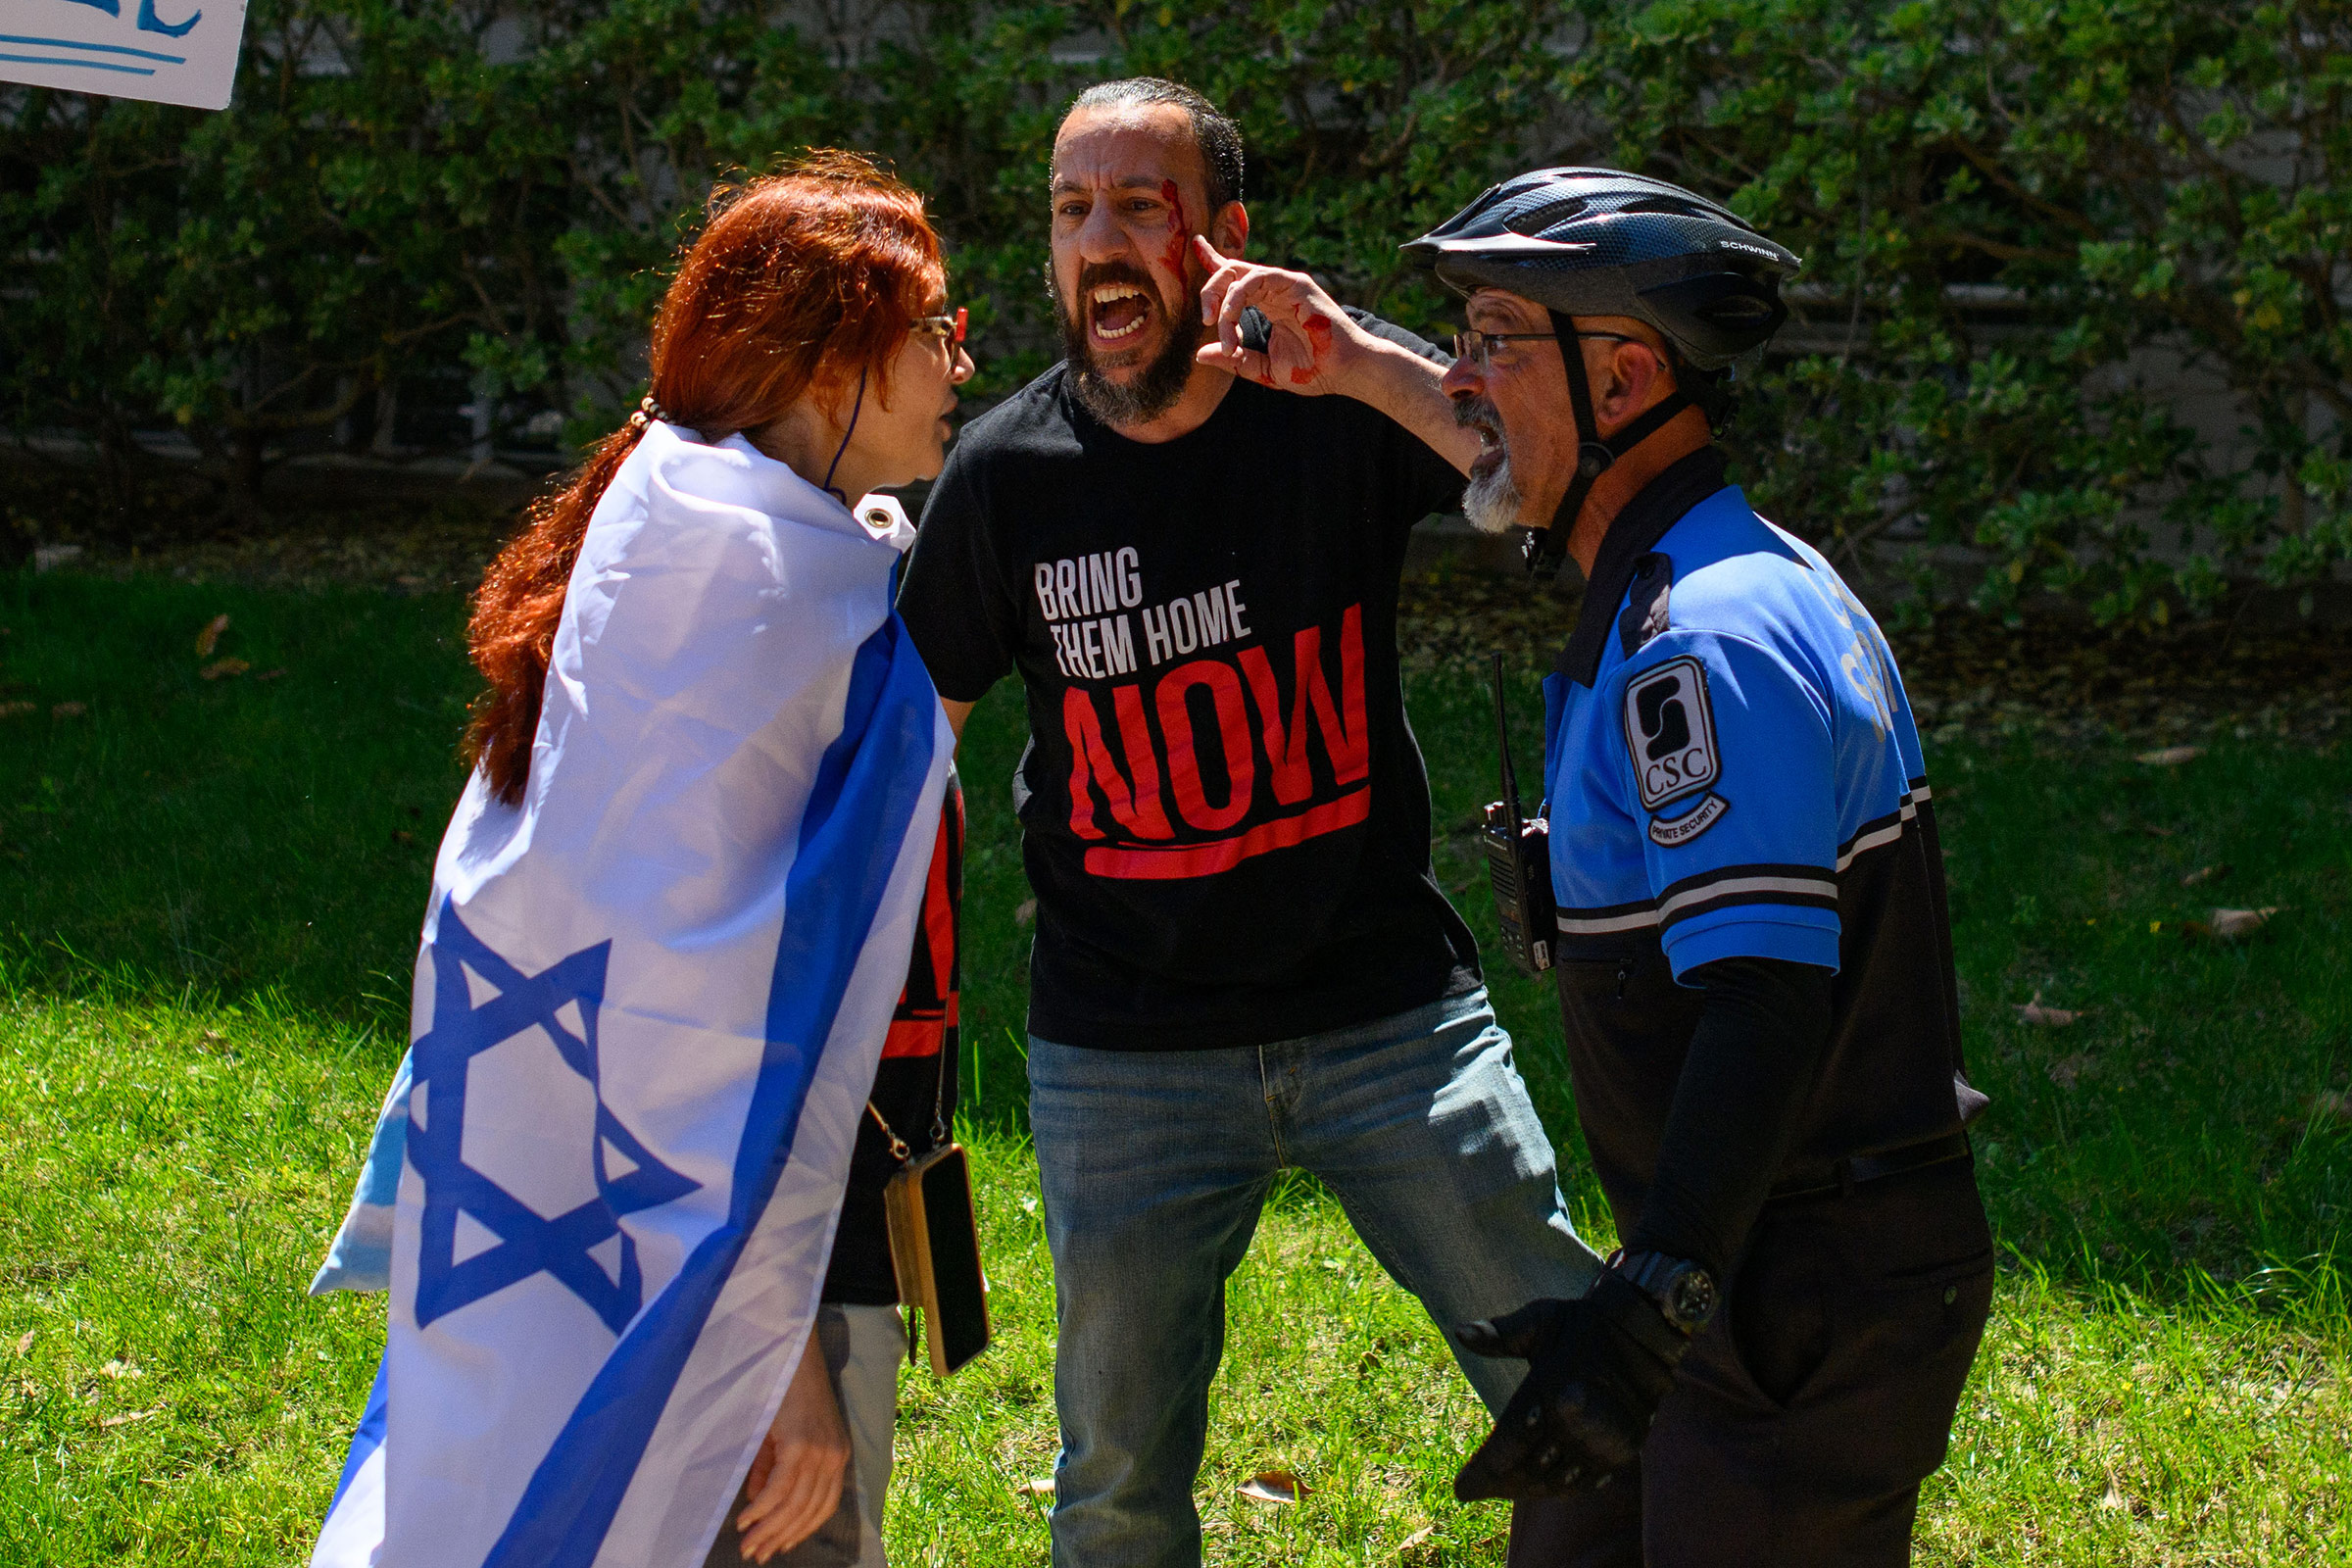 A counterprotester gestures to a bleeding injury on his eyebrow while talking to a Community Service Commission officer after an altercation on April 23.